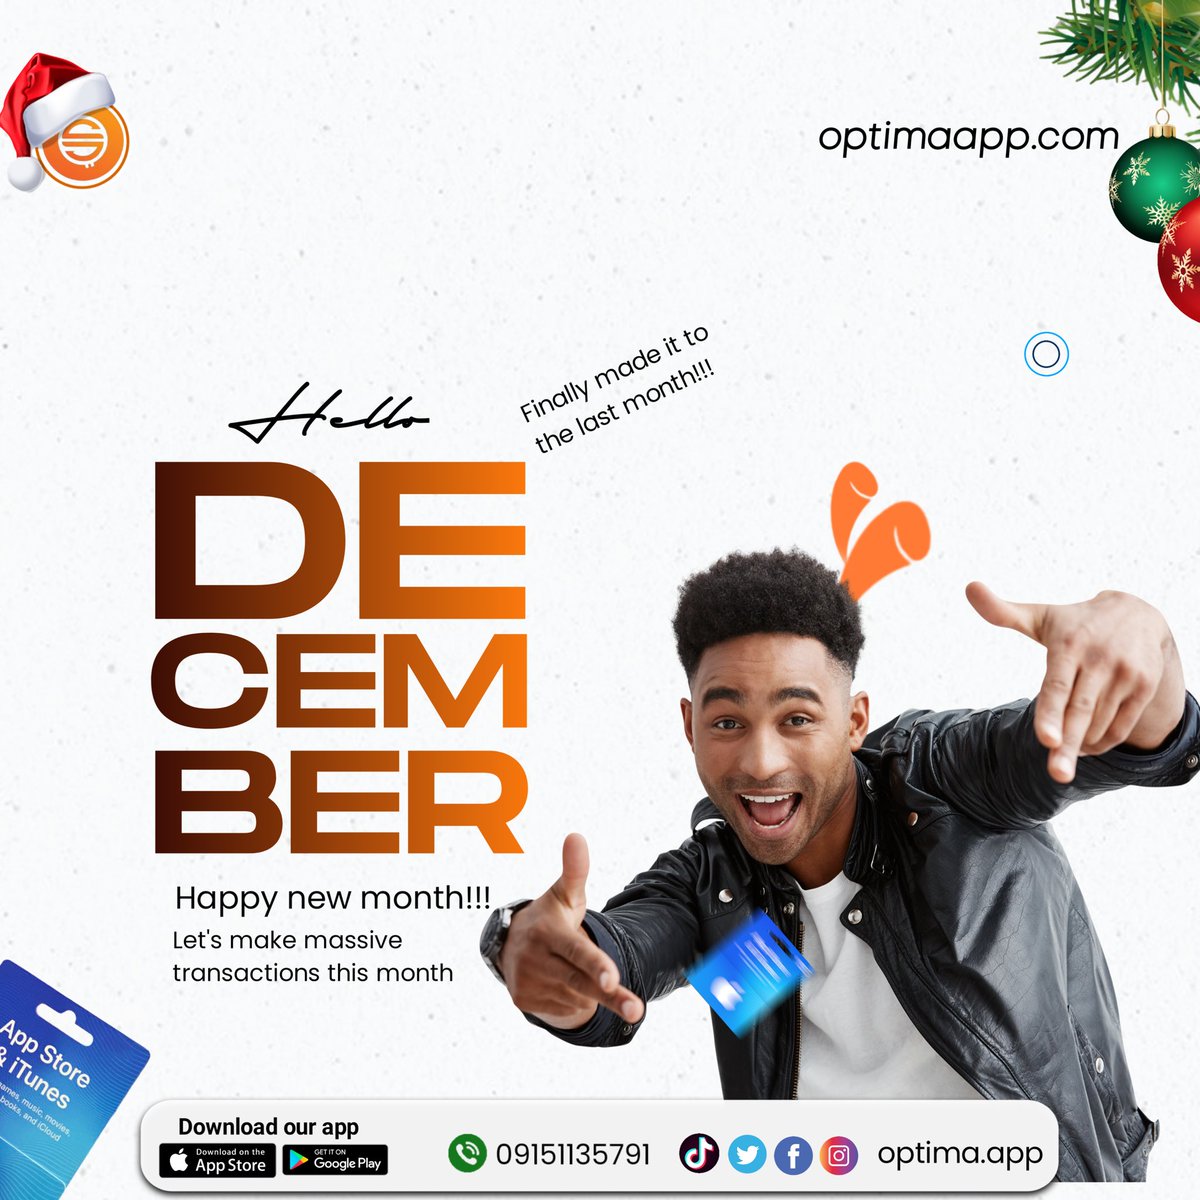 Happy new month fam🧡

May this month bring all the good tidings to you and yours
.
.
.

#tradewithoptima #optimaapp #giftcards #giftcardamazon
#giftcardgiveaway #giftcardsavailable #giftcarddeals
#giftcardholders #itunes